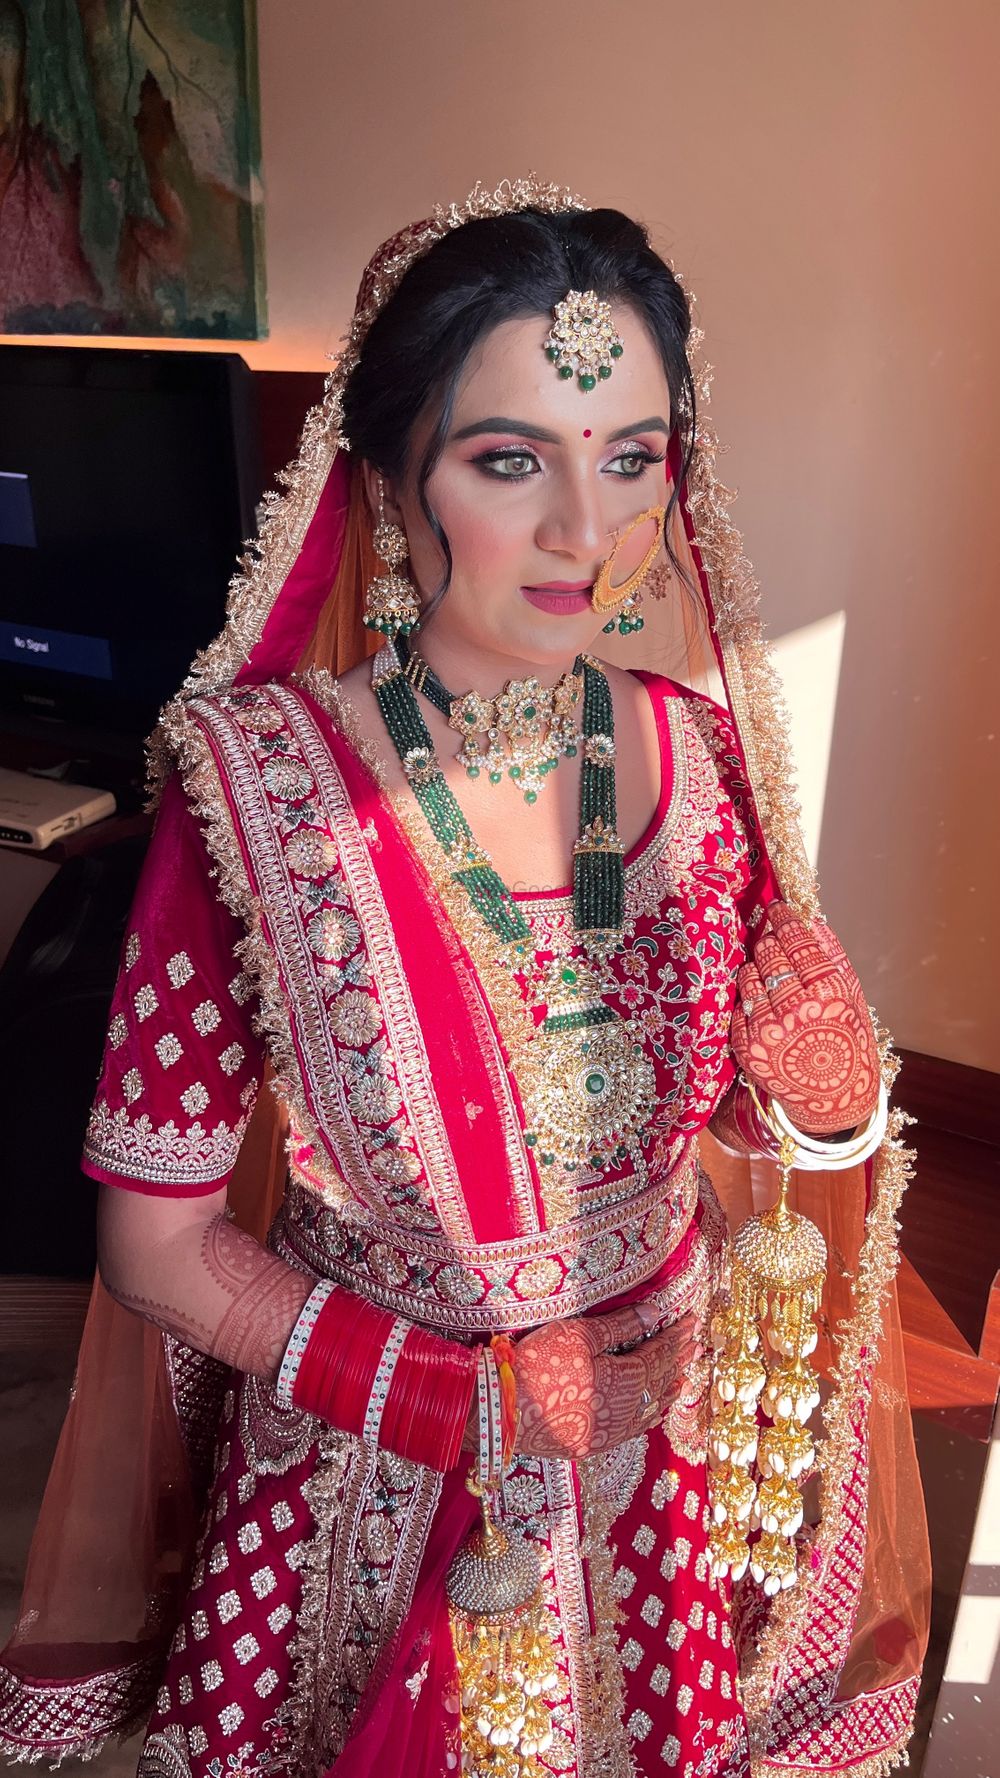 Photo From Bridal Makeover  - By Makeup by Seema Saini